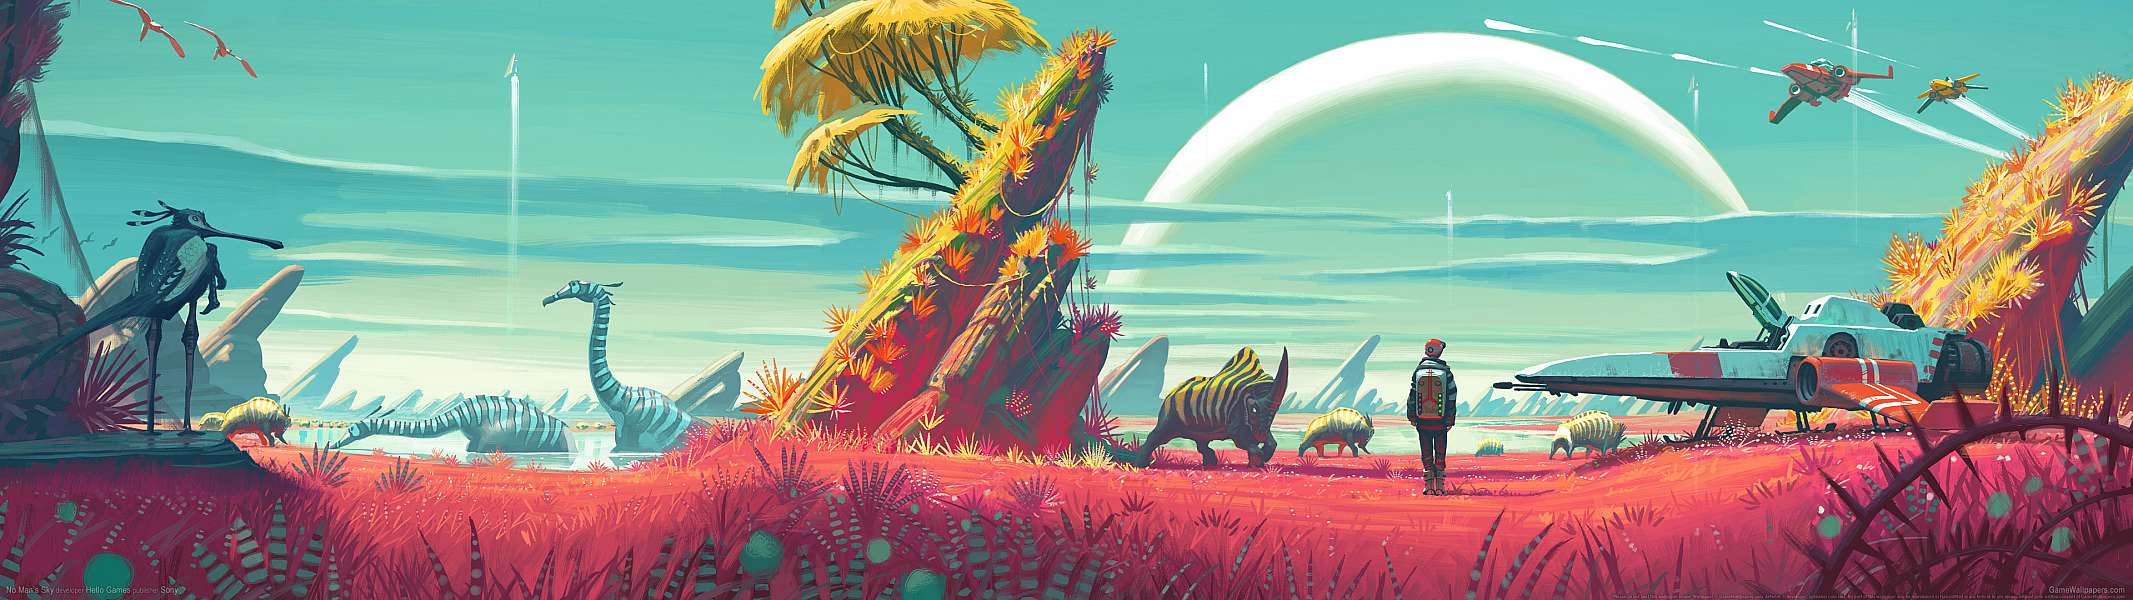 No Man's Sky dual screen wallpaper or background